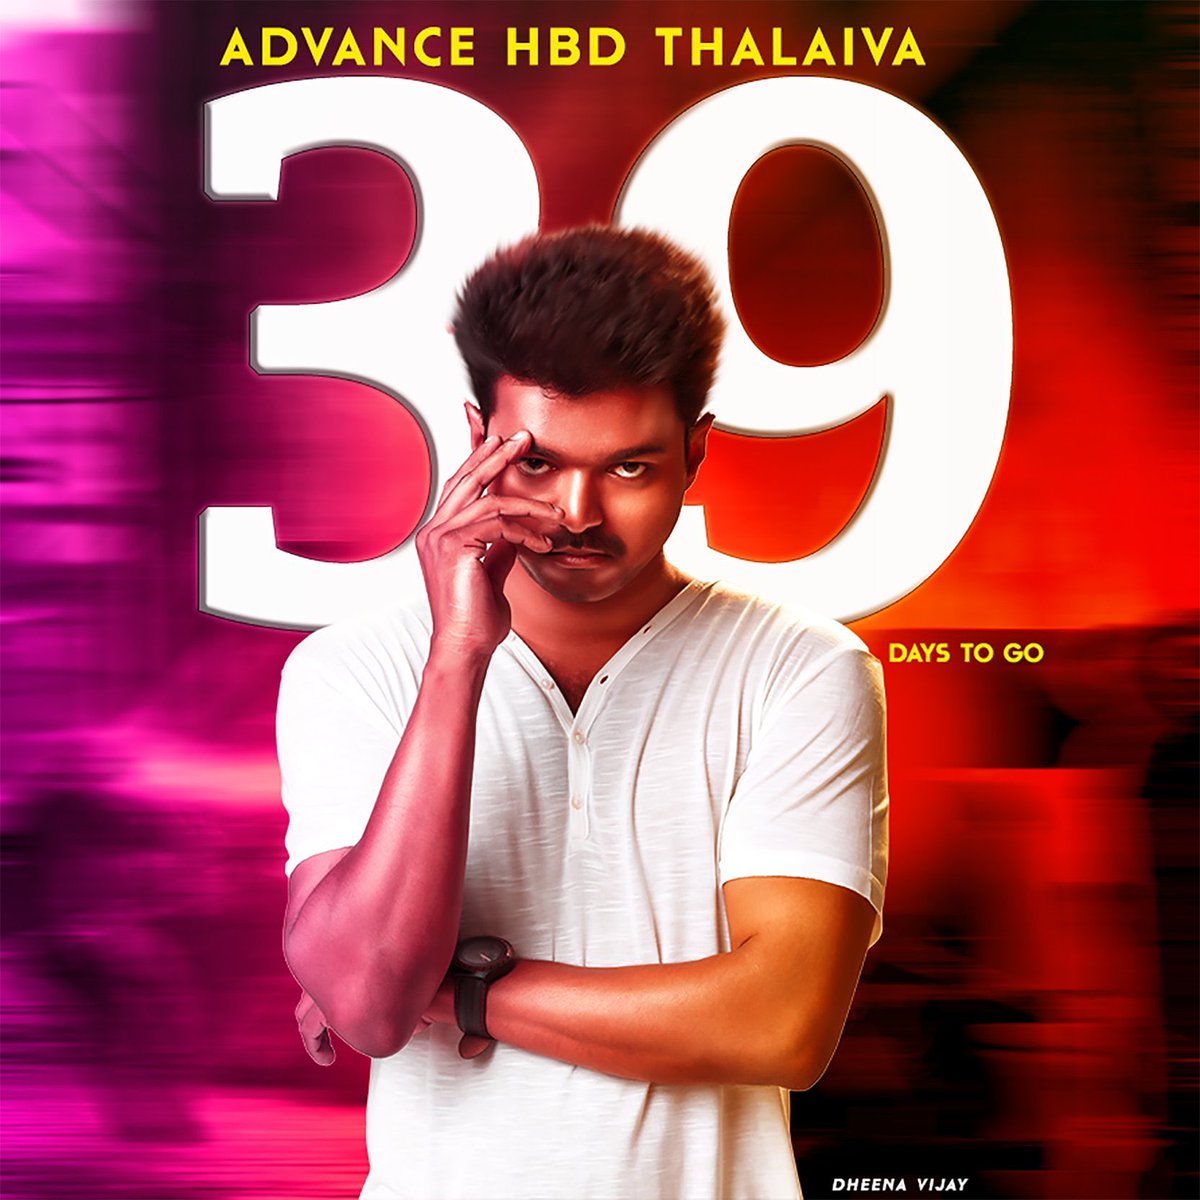 You know what? Guess who is back? We back baby We back we back we back back back #Kaththi 39 Days to go for Thalapathy @actorvijay anna birthday festival 👑🎂🎉❤️ #39DaysToGo4ThalapathyBday #TheGreatestOfAllTime #June22 Welfare Day @SARKAR_Munaf #TheGOATFromSeptember05